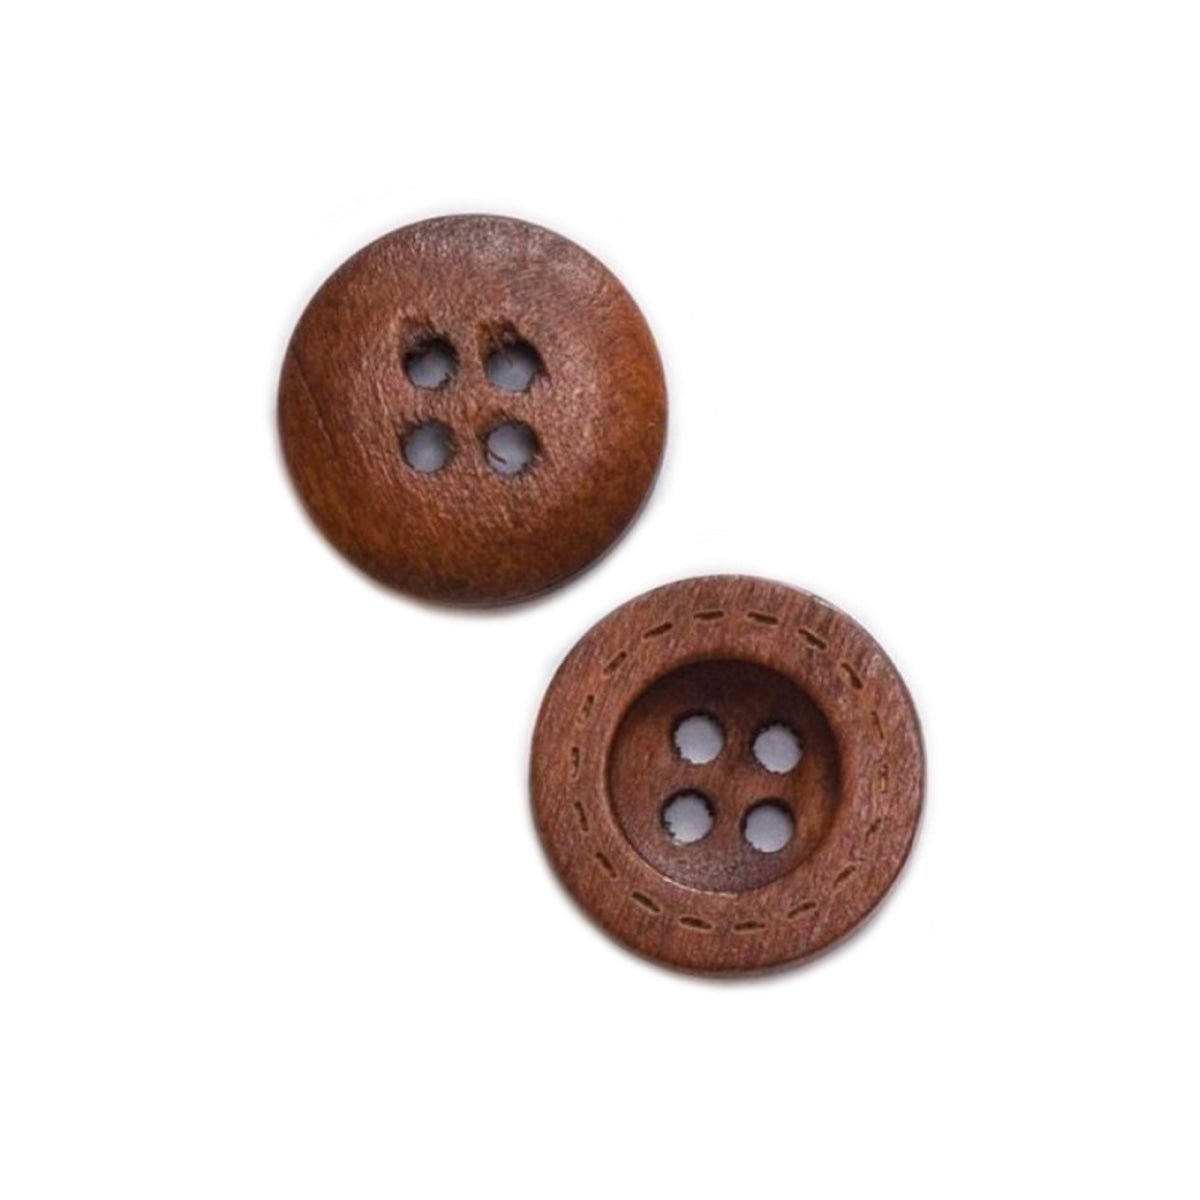 50pcs 13mm-18mm 4 Hole Wooden Buttons for Sewing Clothing Jacket Blazer Sweaters - Dark Brown 13mm - - Asia Sell